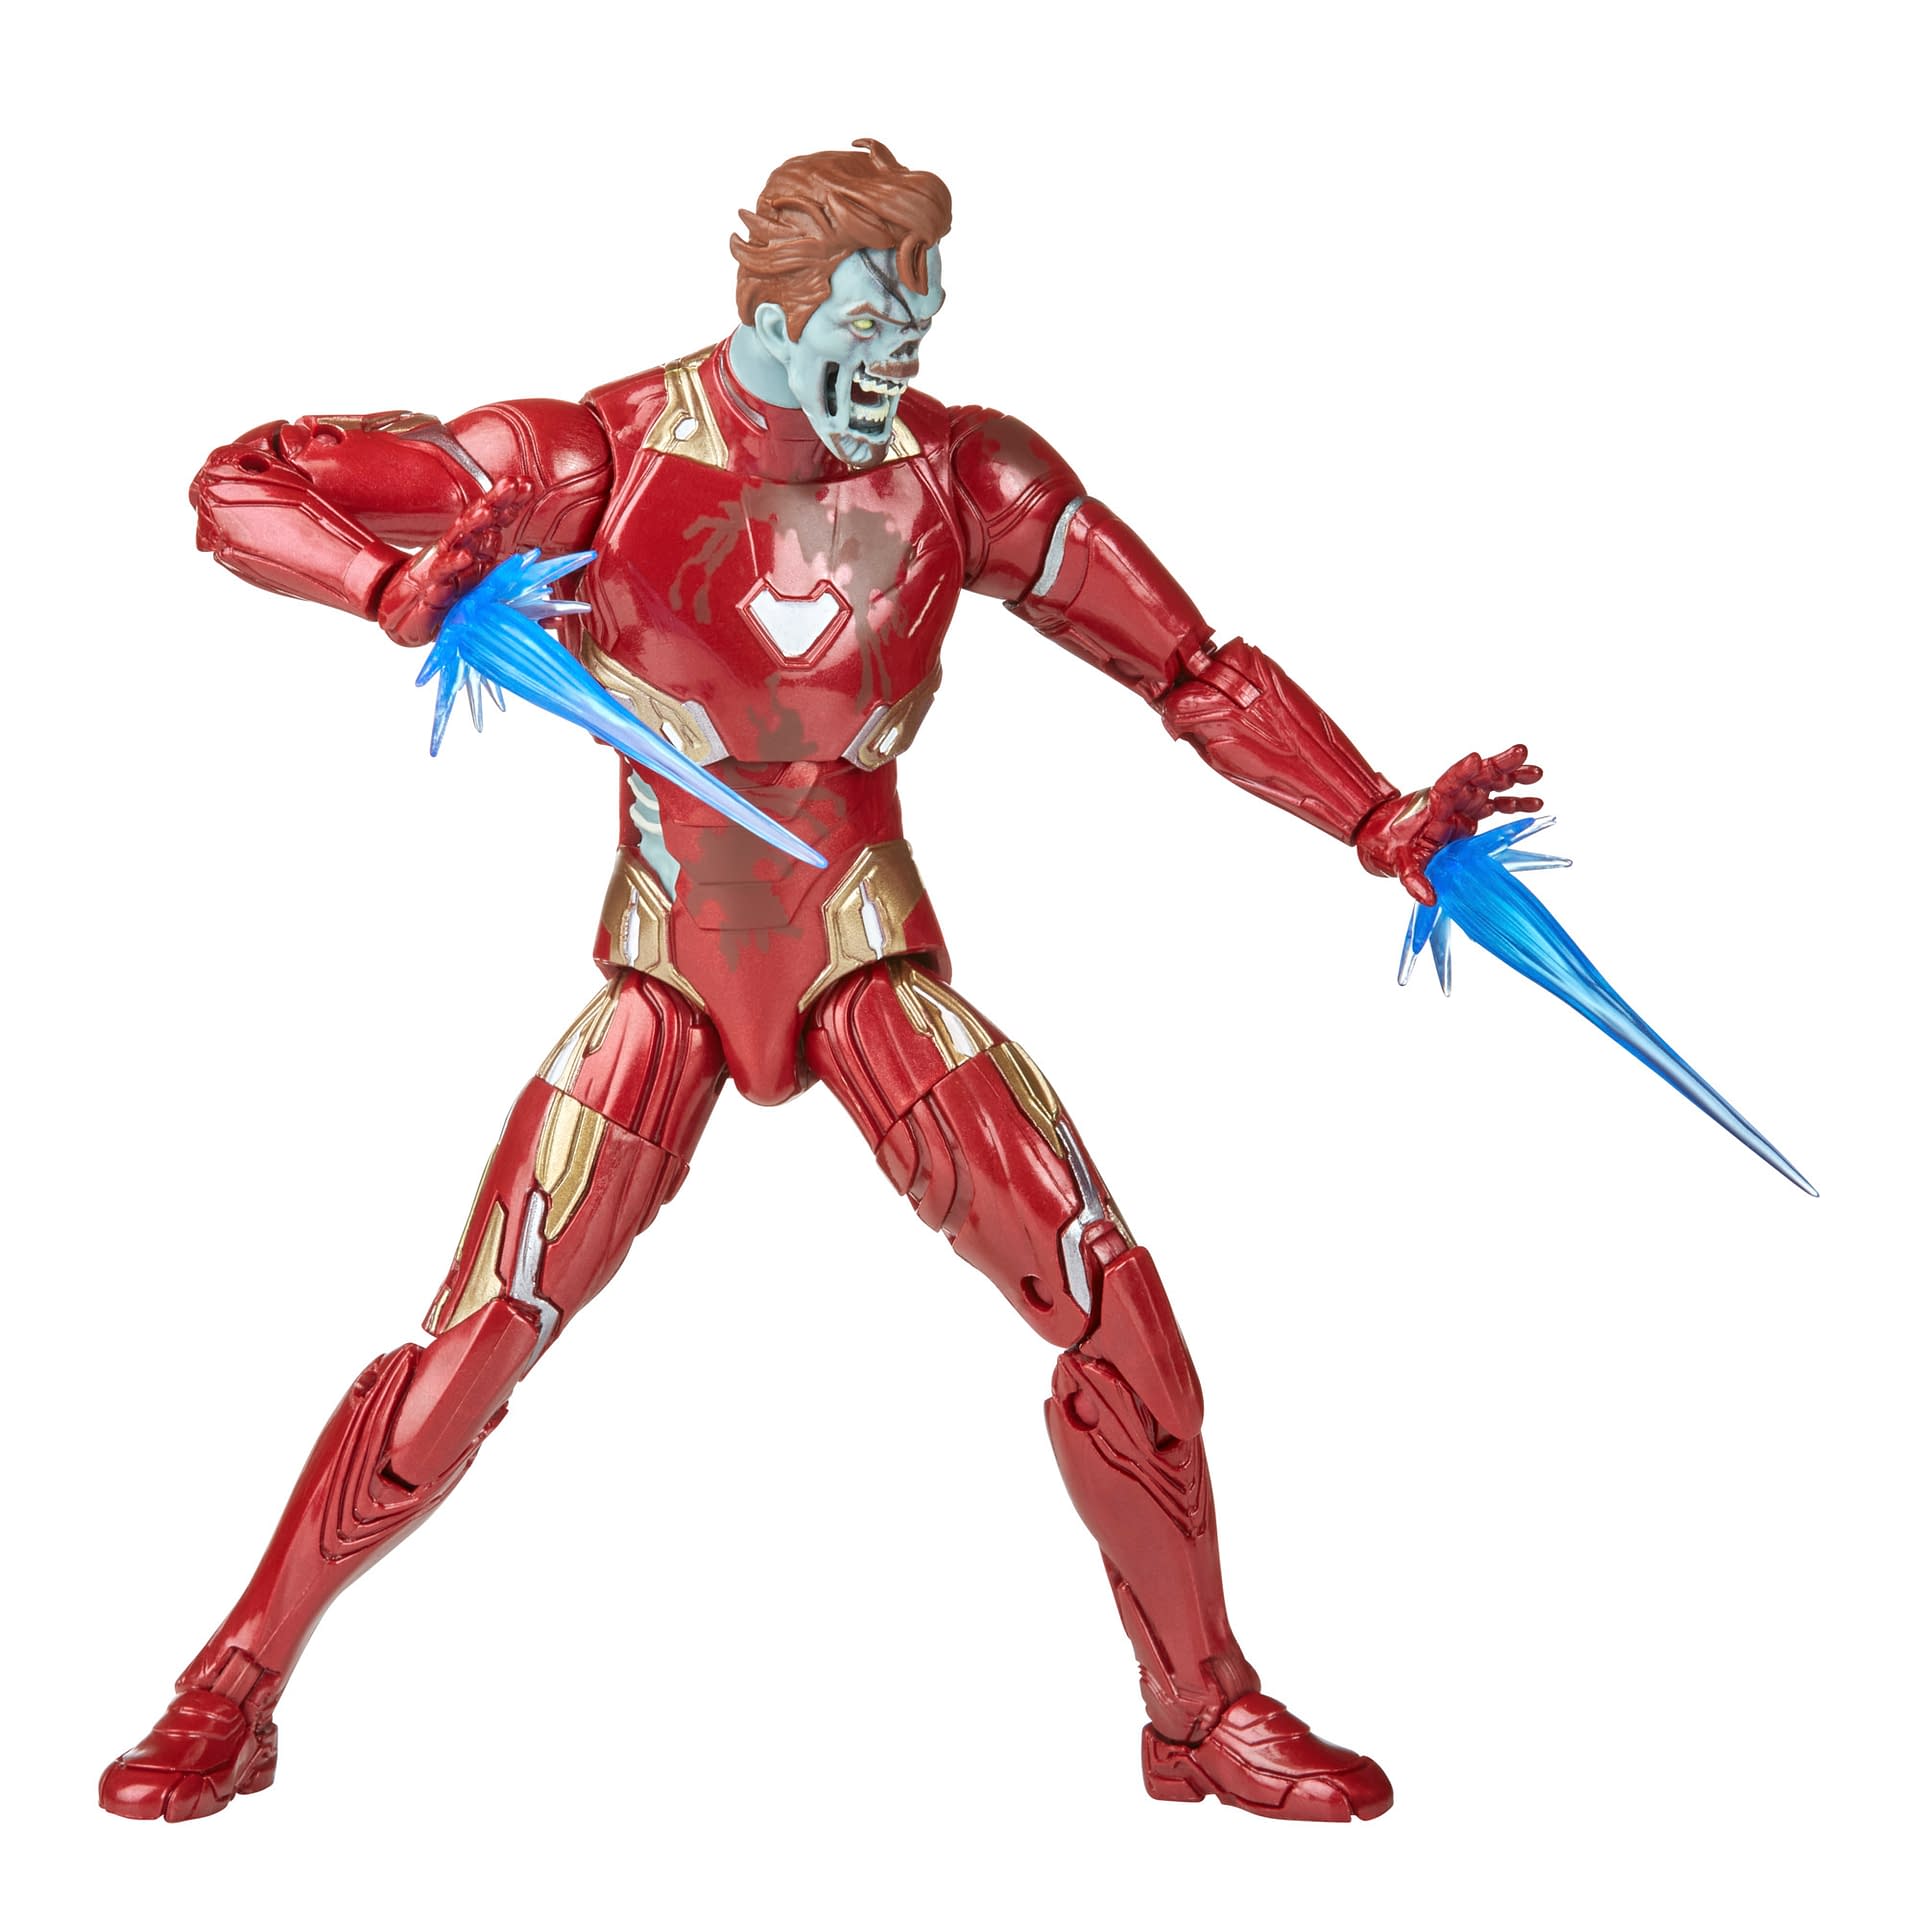 Marvel Zombies Rise as New Marvel Legend What If…? Pre-Order Arrive 